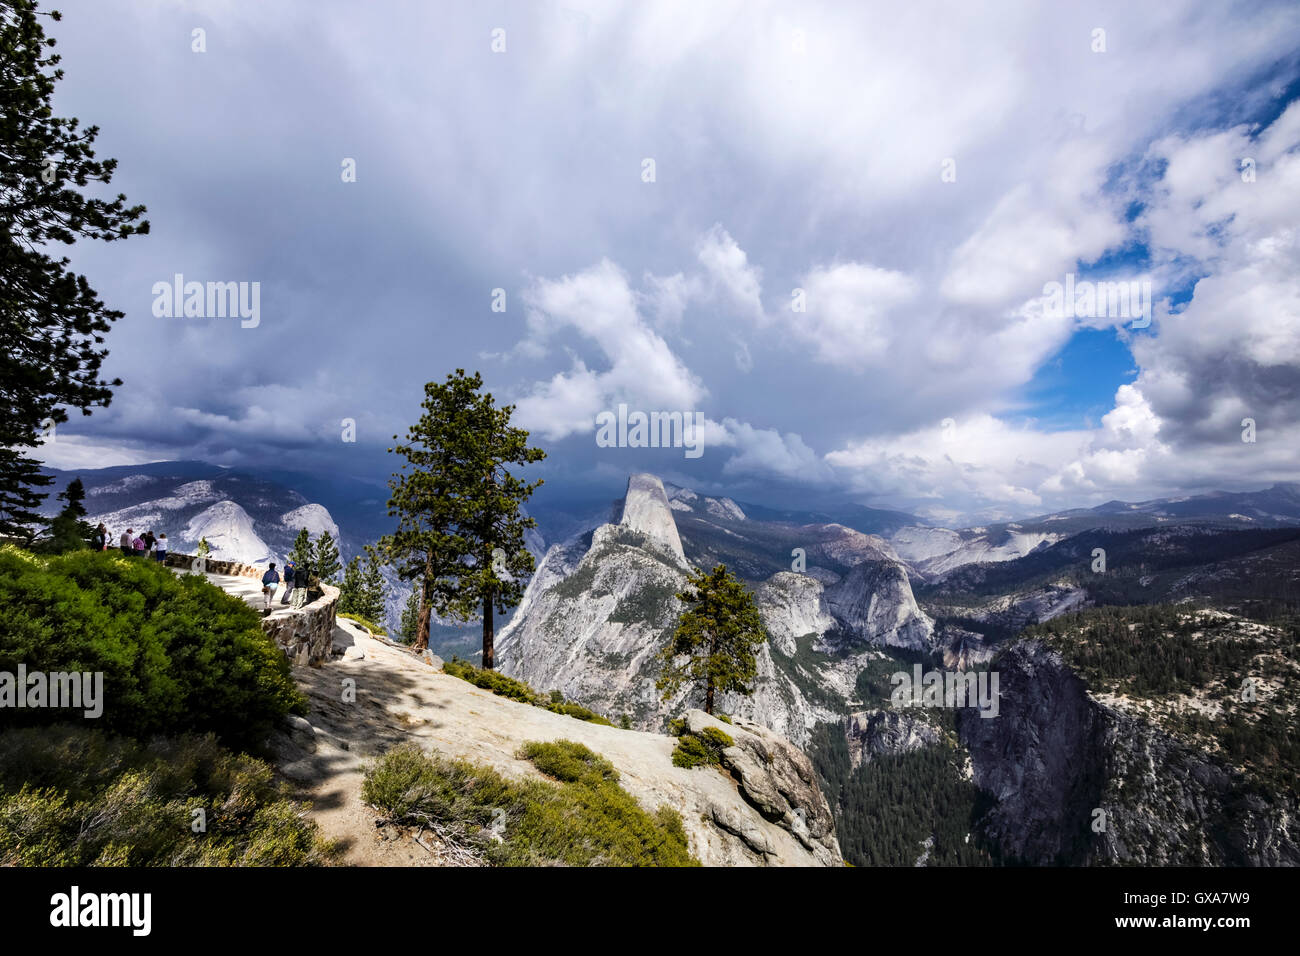 Yosemite from the Glacier point area on a stormy day Stock Photo